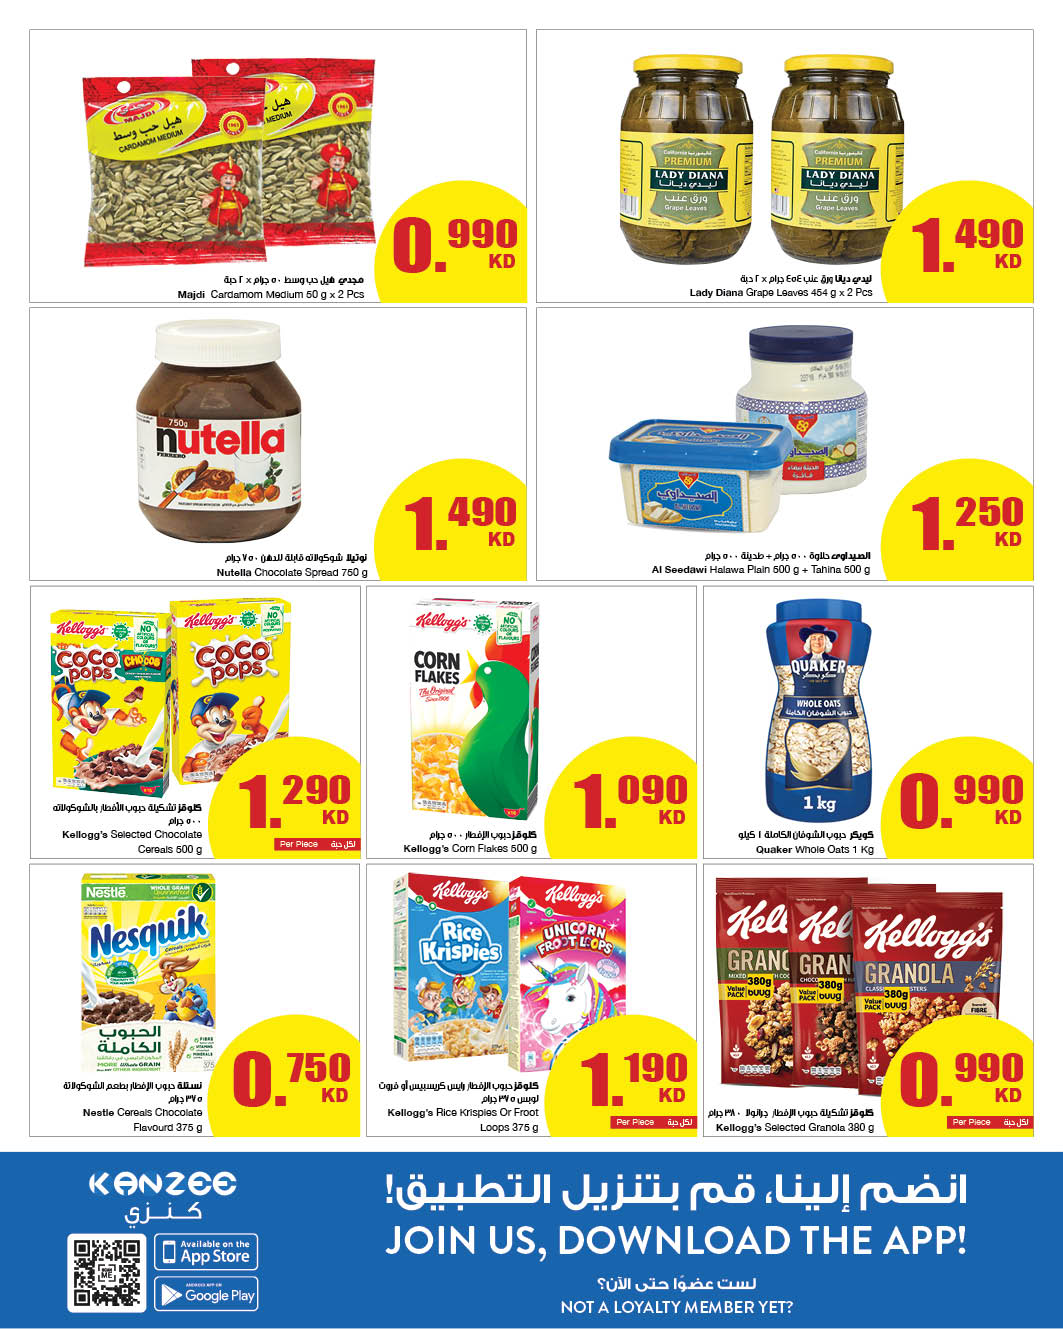 The Sultan Center Weekly Offers, Kuwait Sultan promotion Sale 2